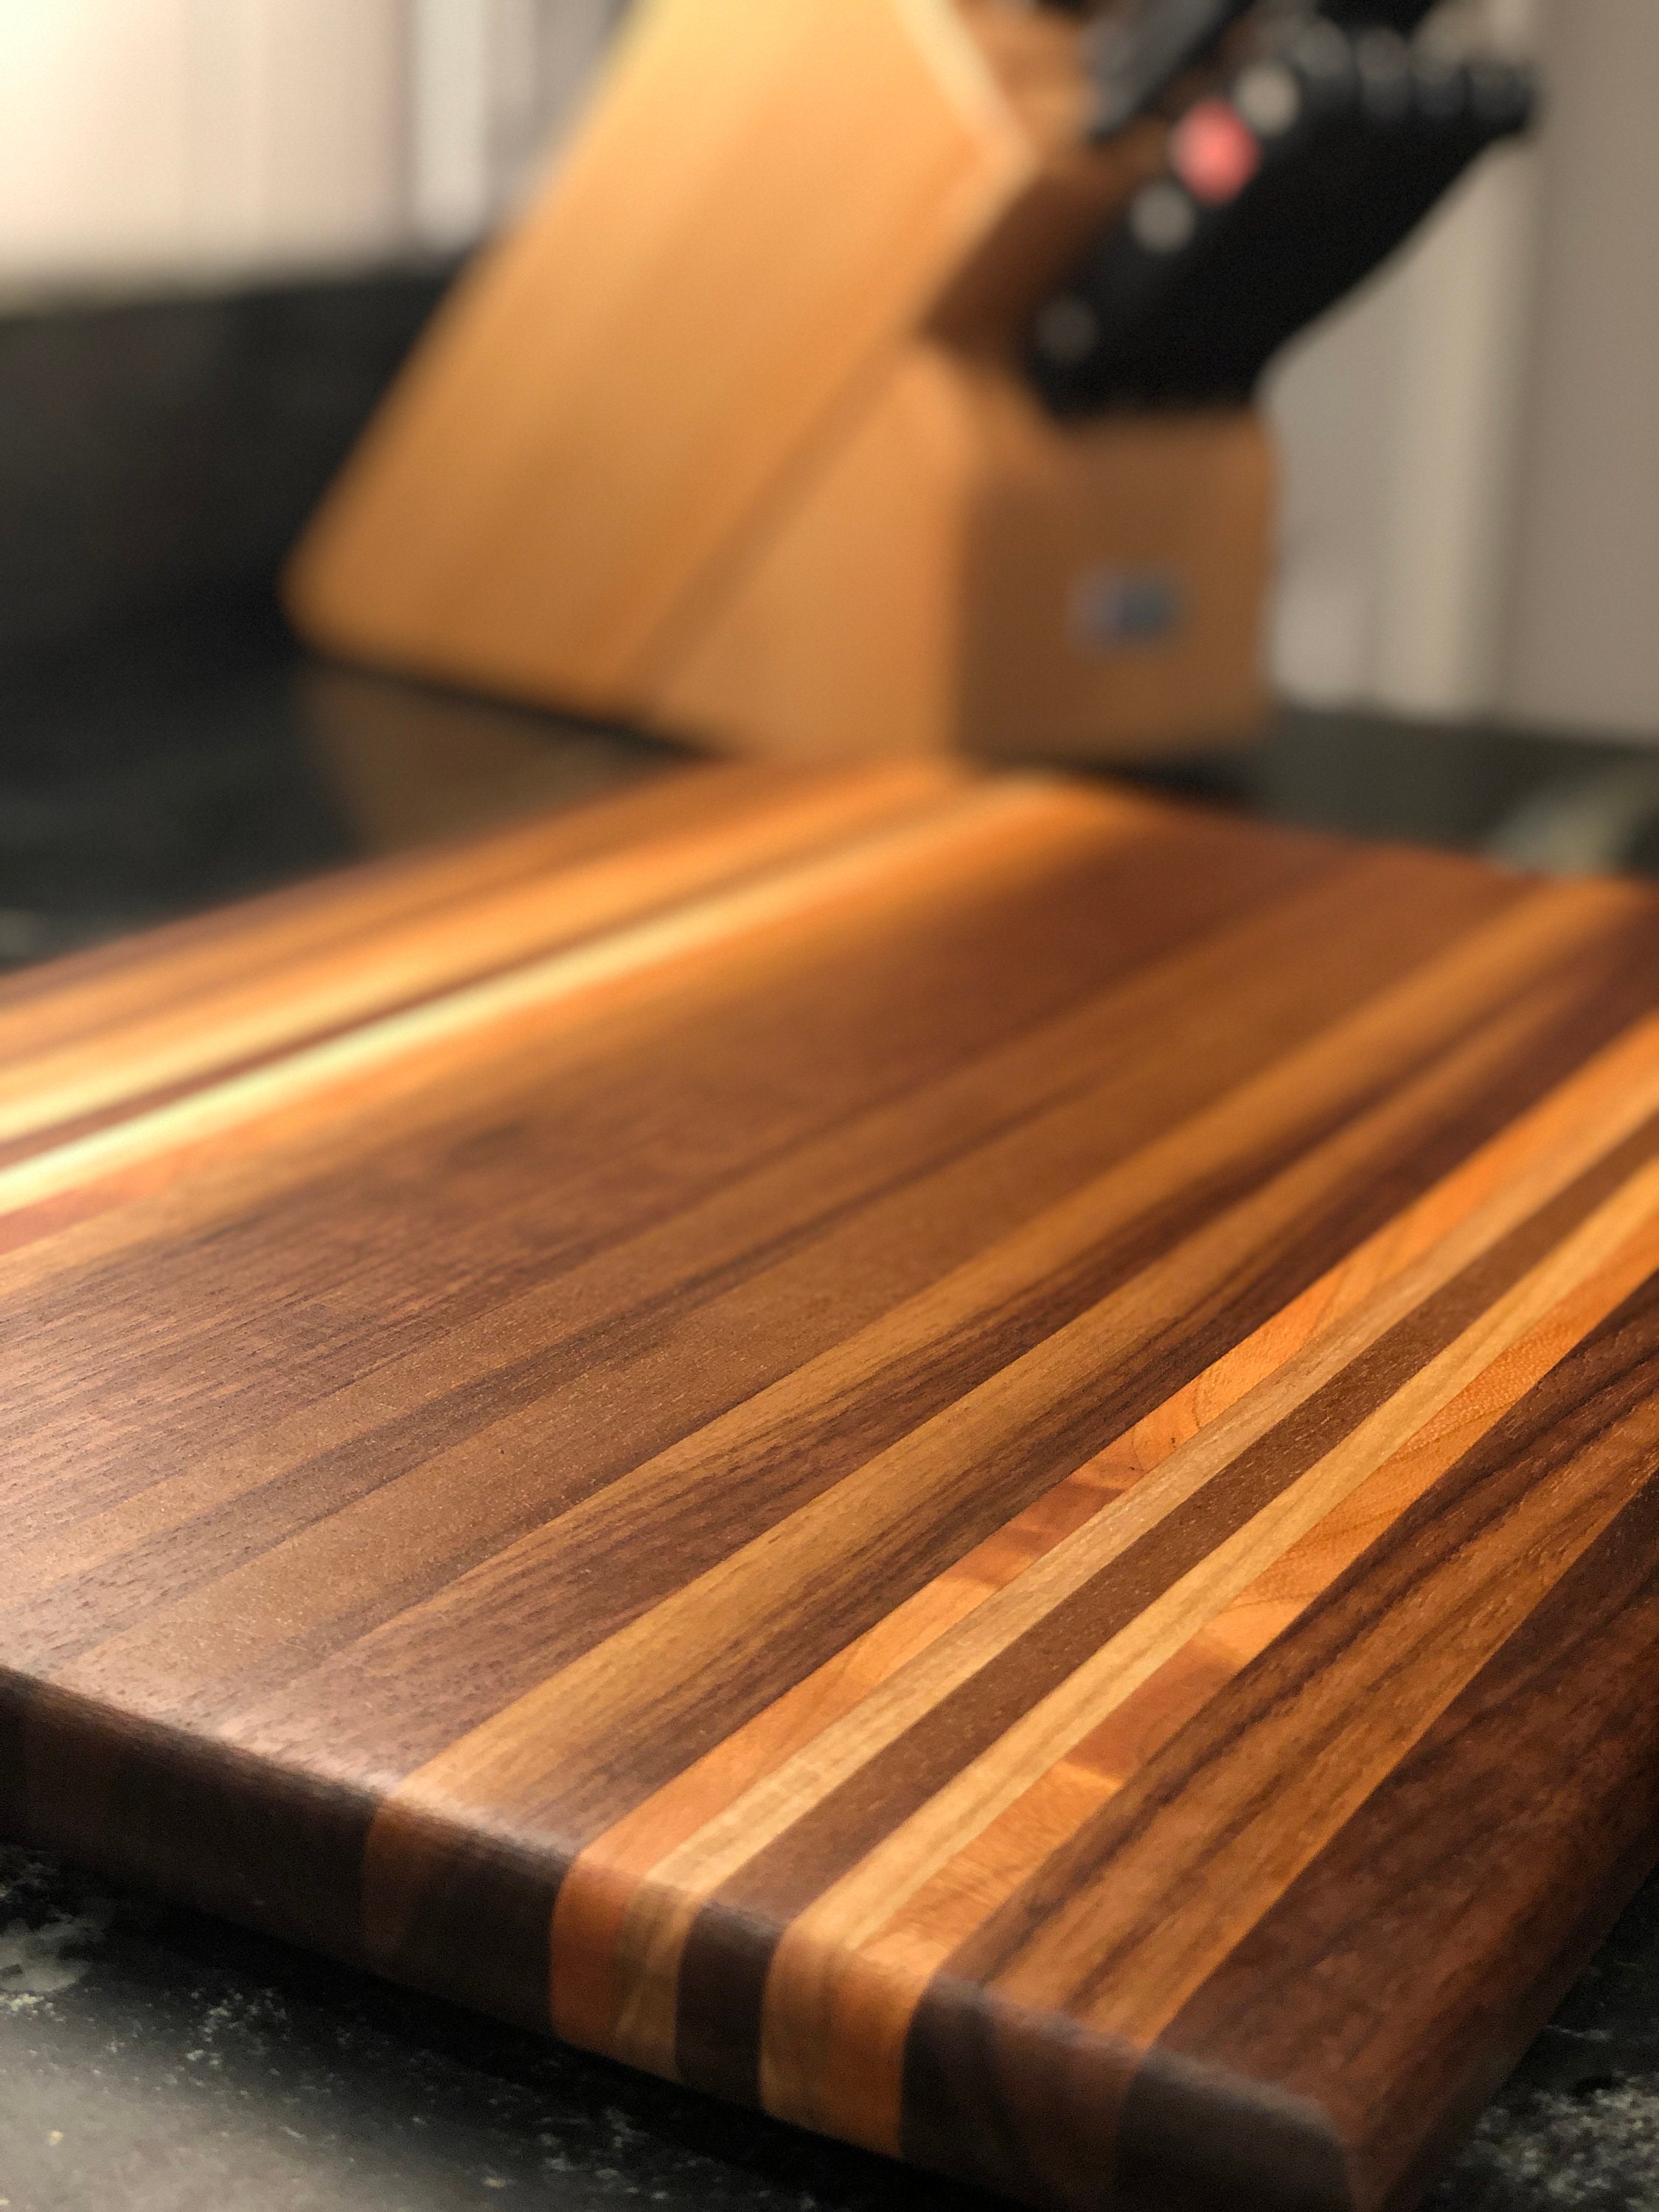 Walnut Cutting Board heritage for Rustic Kitchen, Wooden